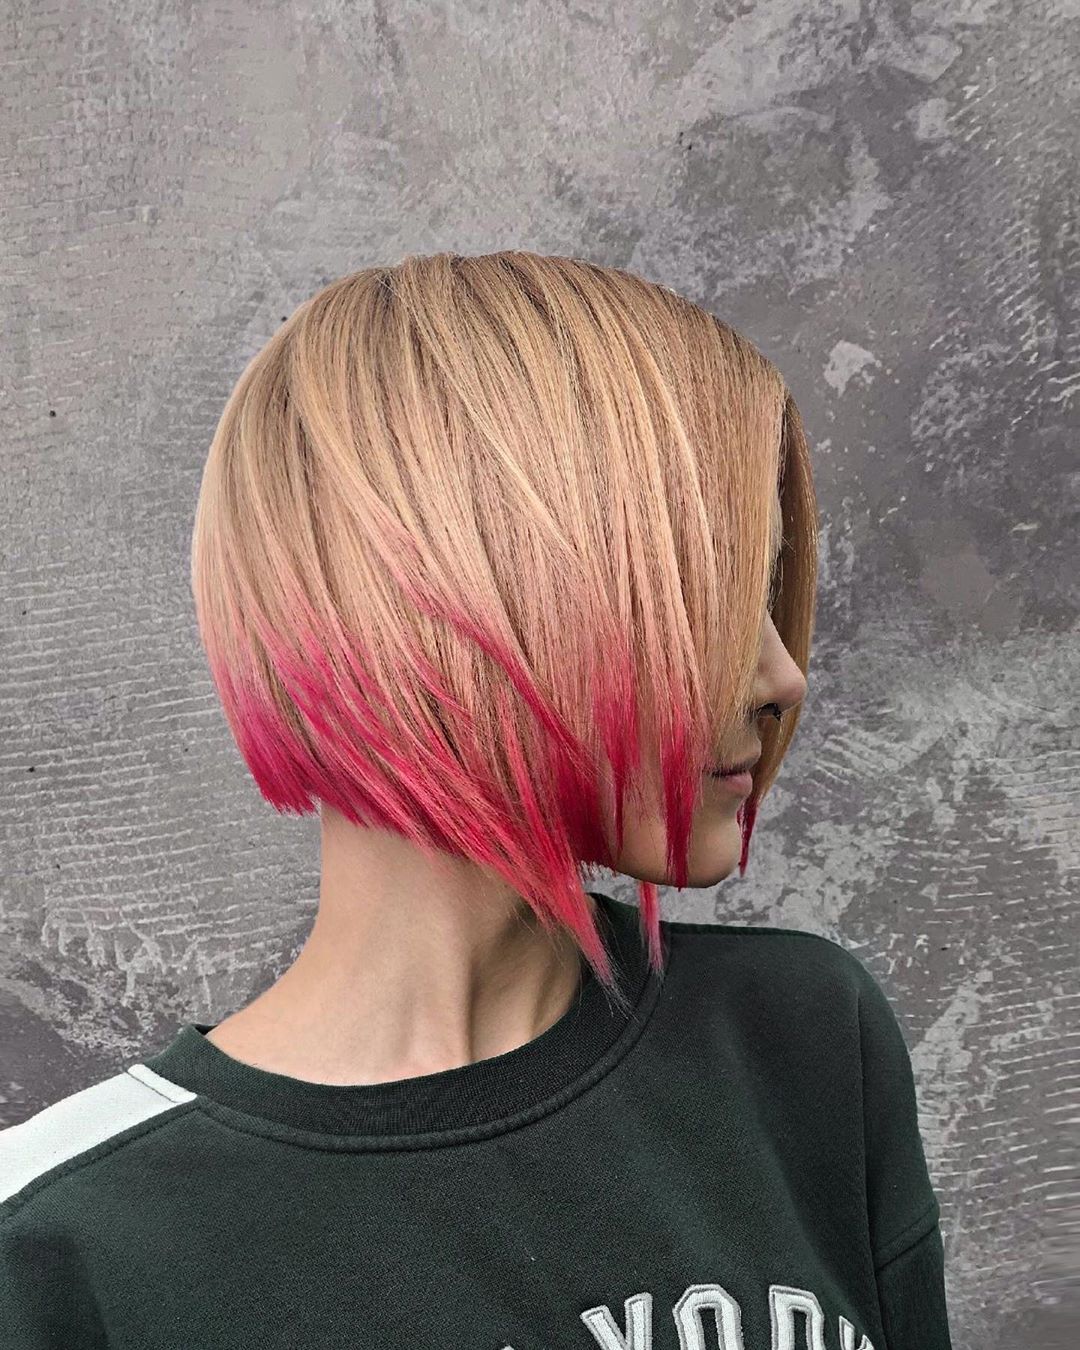 Trendy Bob Haircuts and Color - 2021 Short Hairstyles for Thick Hair